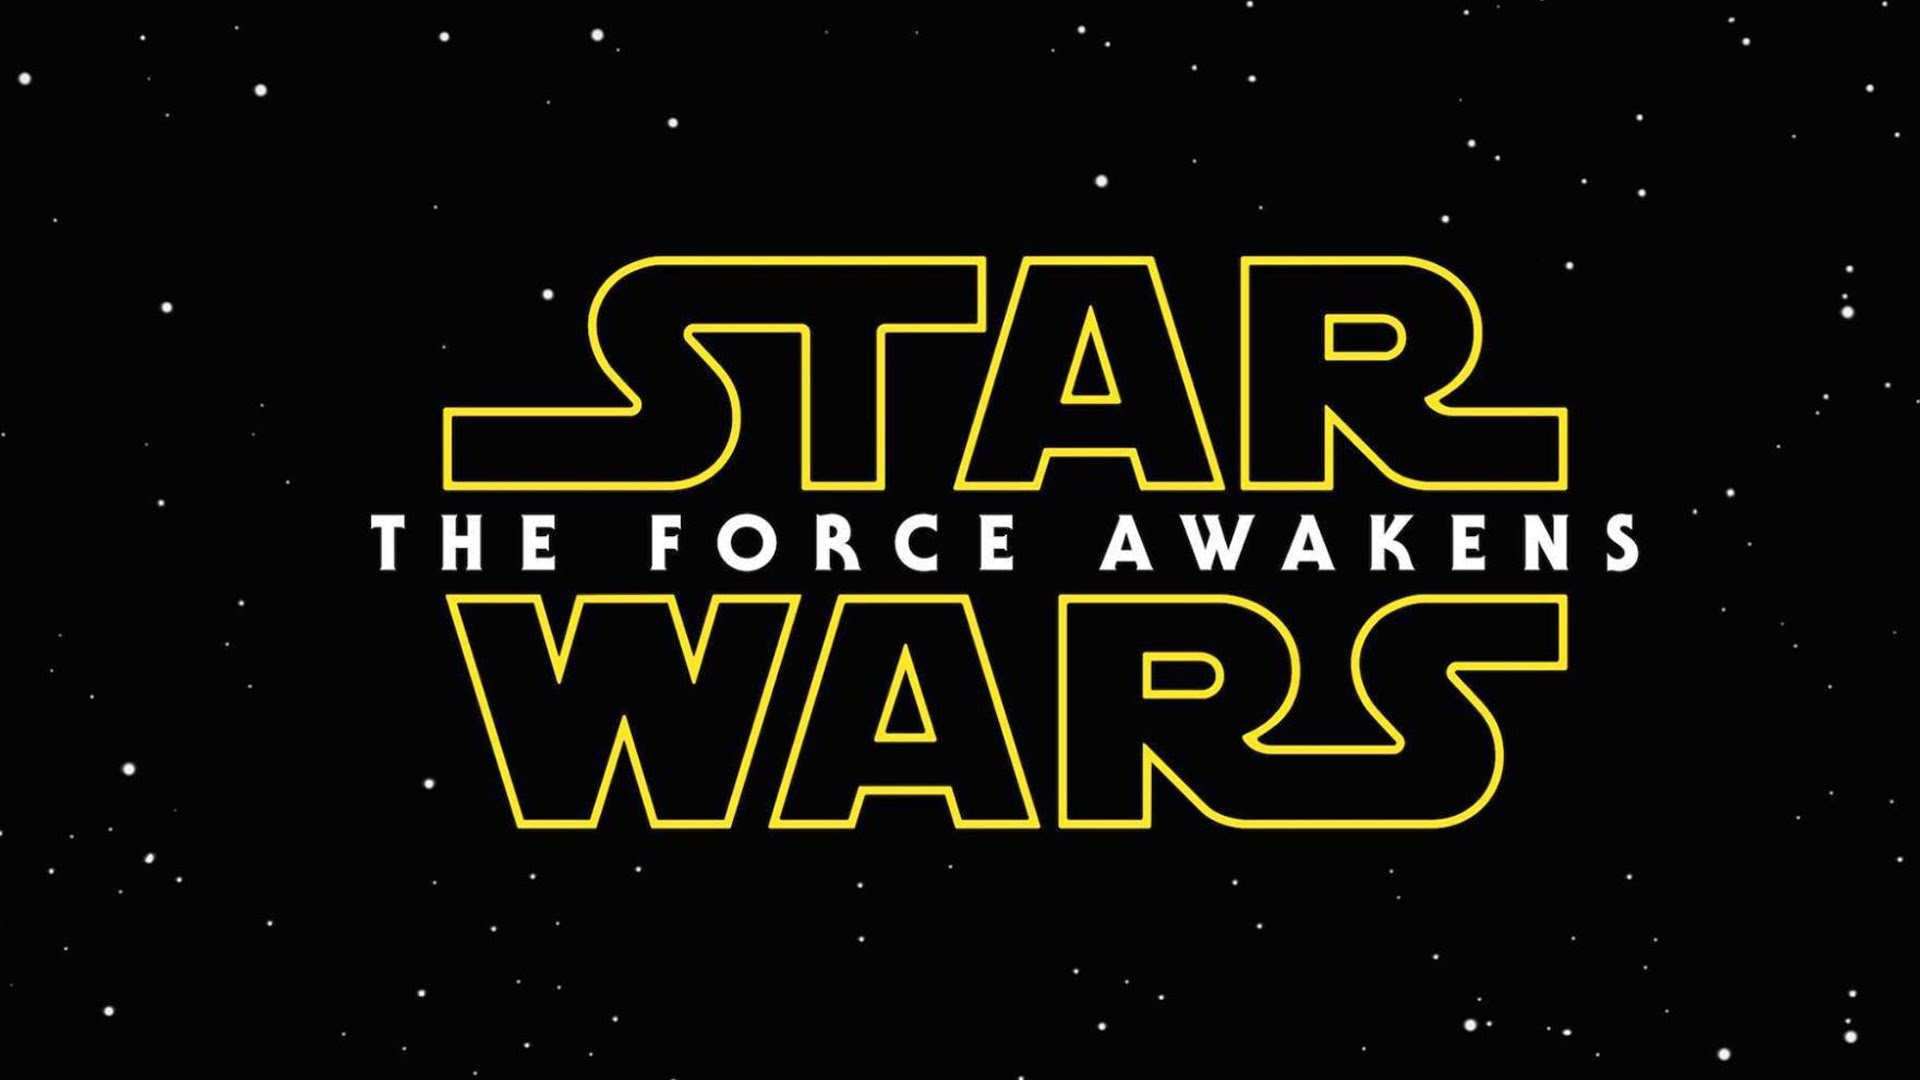 Star Wars The Force Awakens Opens This Weekend